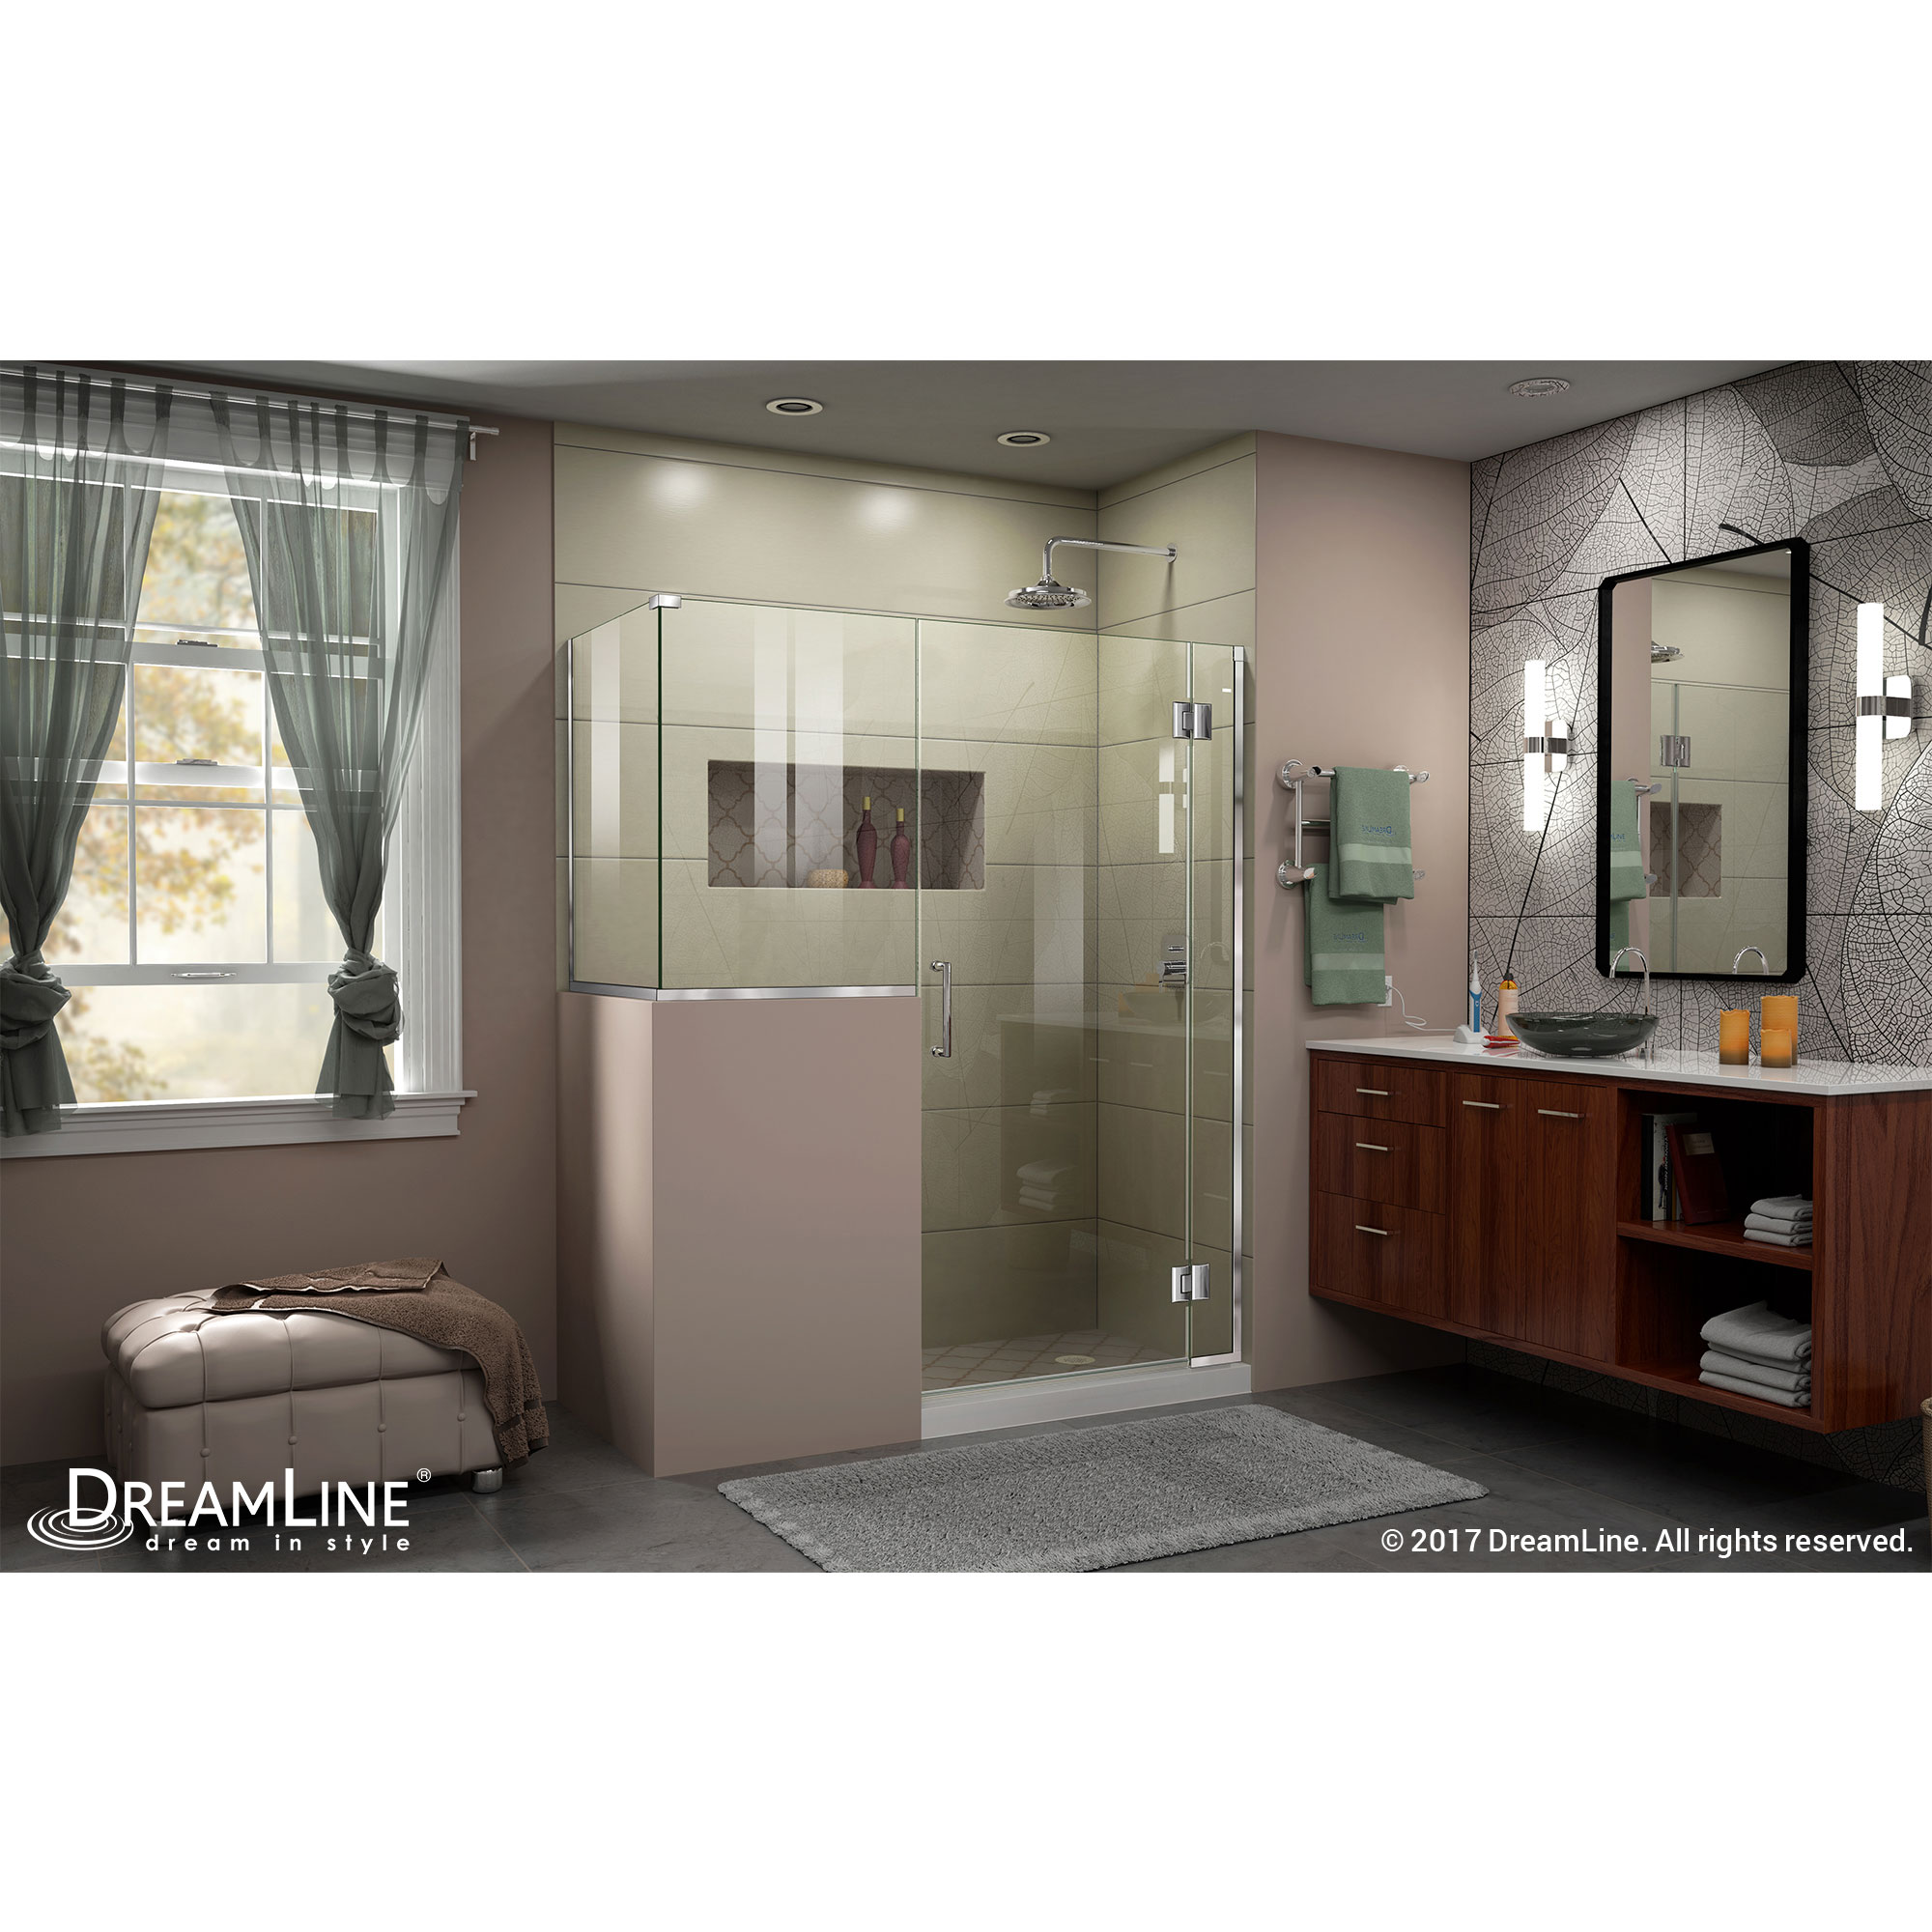 DreamLine Unidoor-X 59 in. W x 36 3/8 in. D x 72 in. H Hinged Shower Enclosure in Chrome